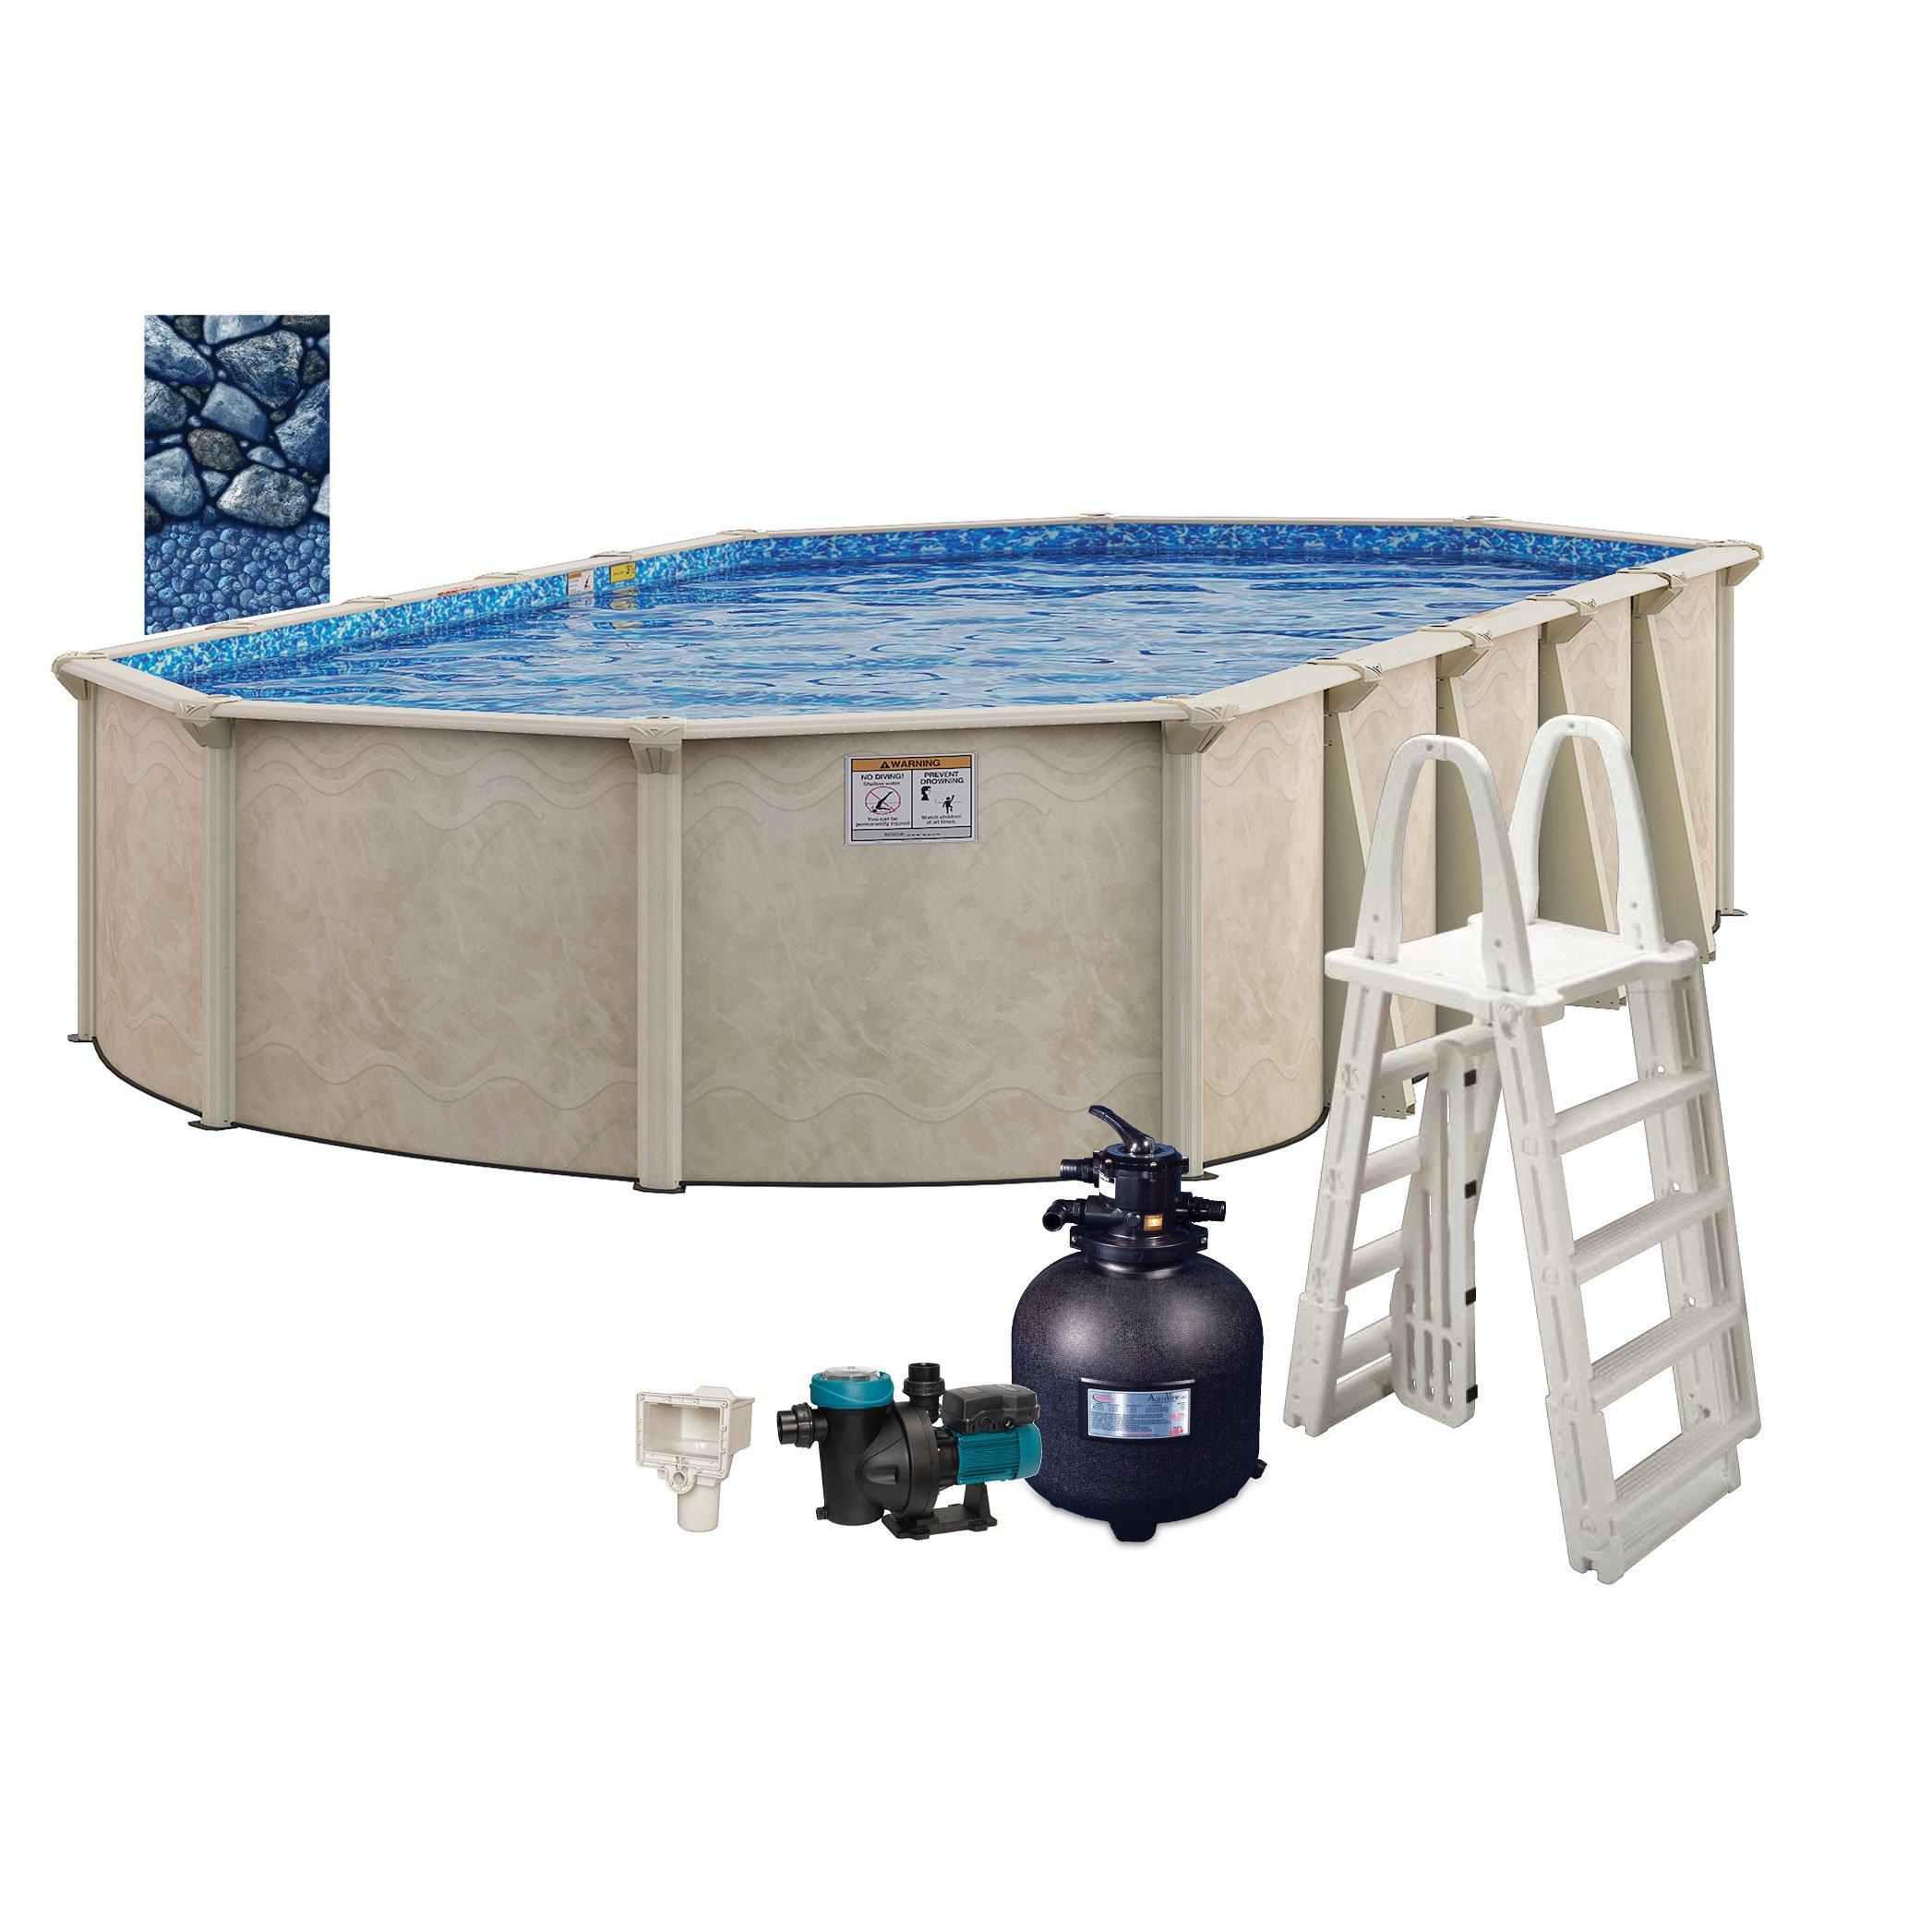 Cascade 12'x24 x 52 Oval Above Ground Pool Package